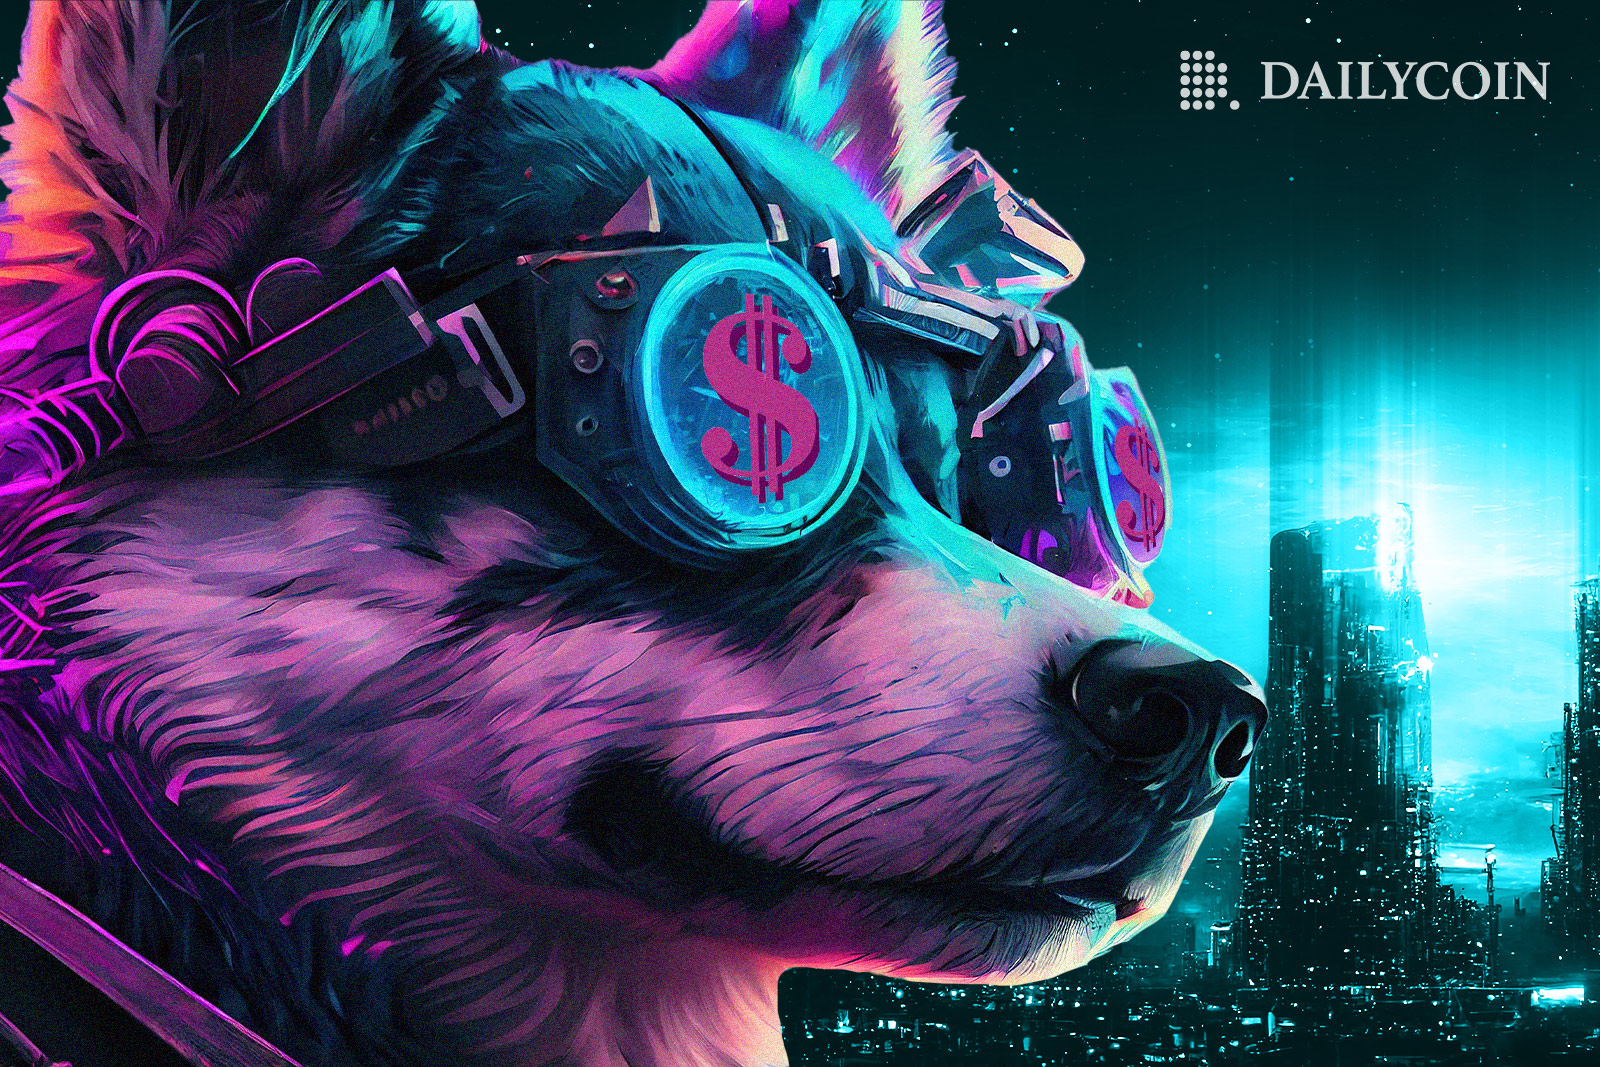 A dog in a futuristic city wearing steam punk glasses with dollar signs on them.